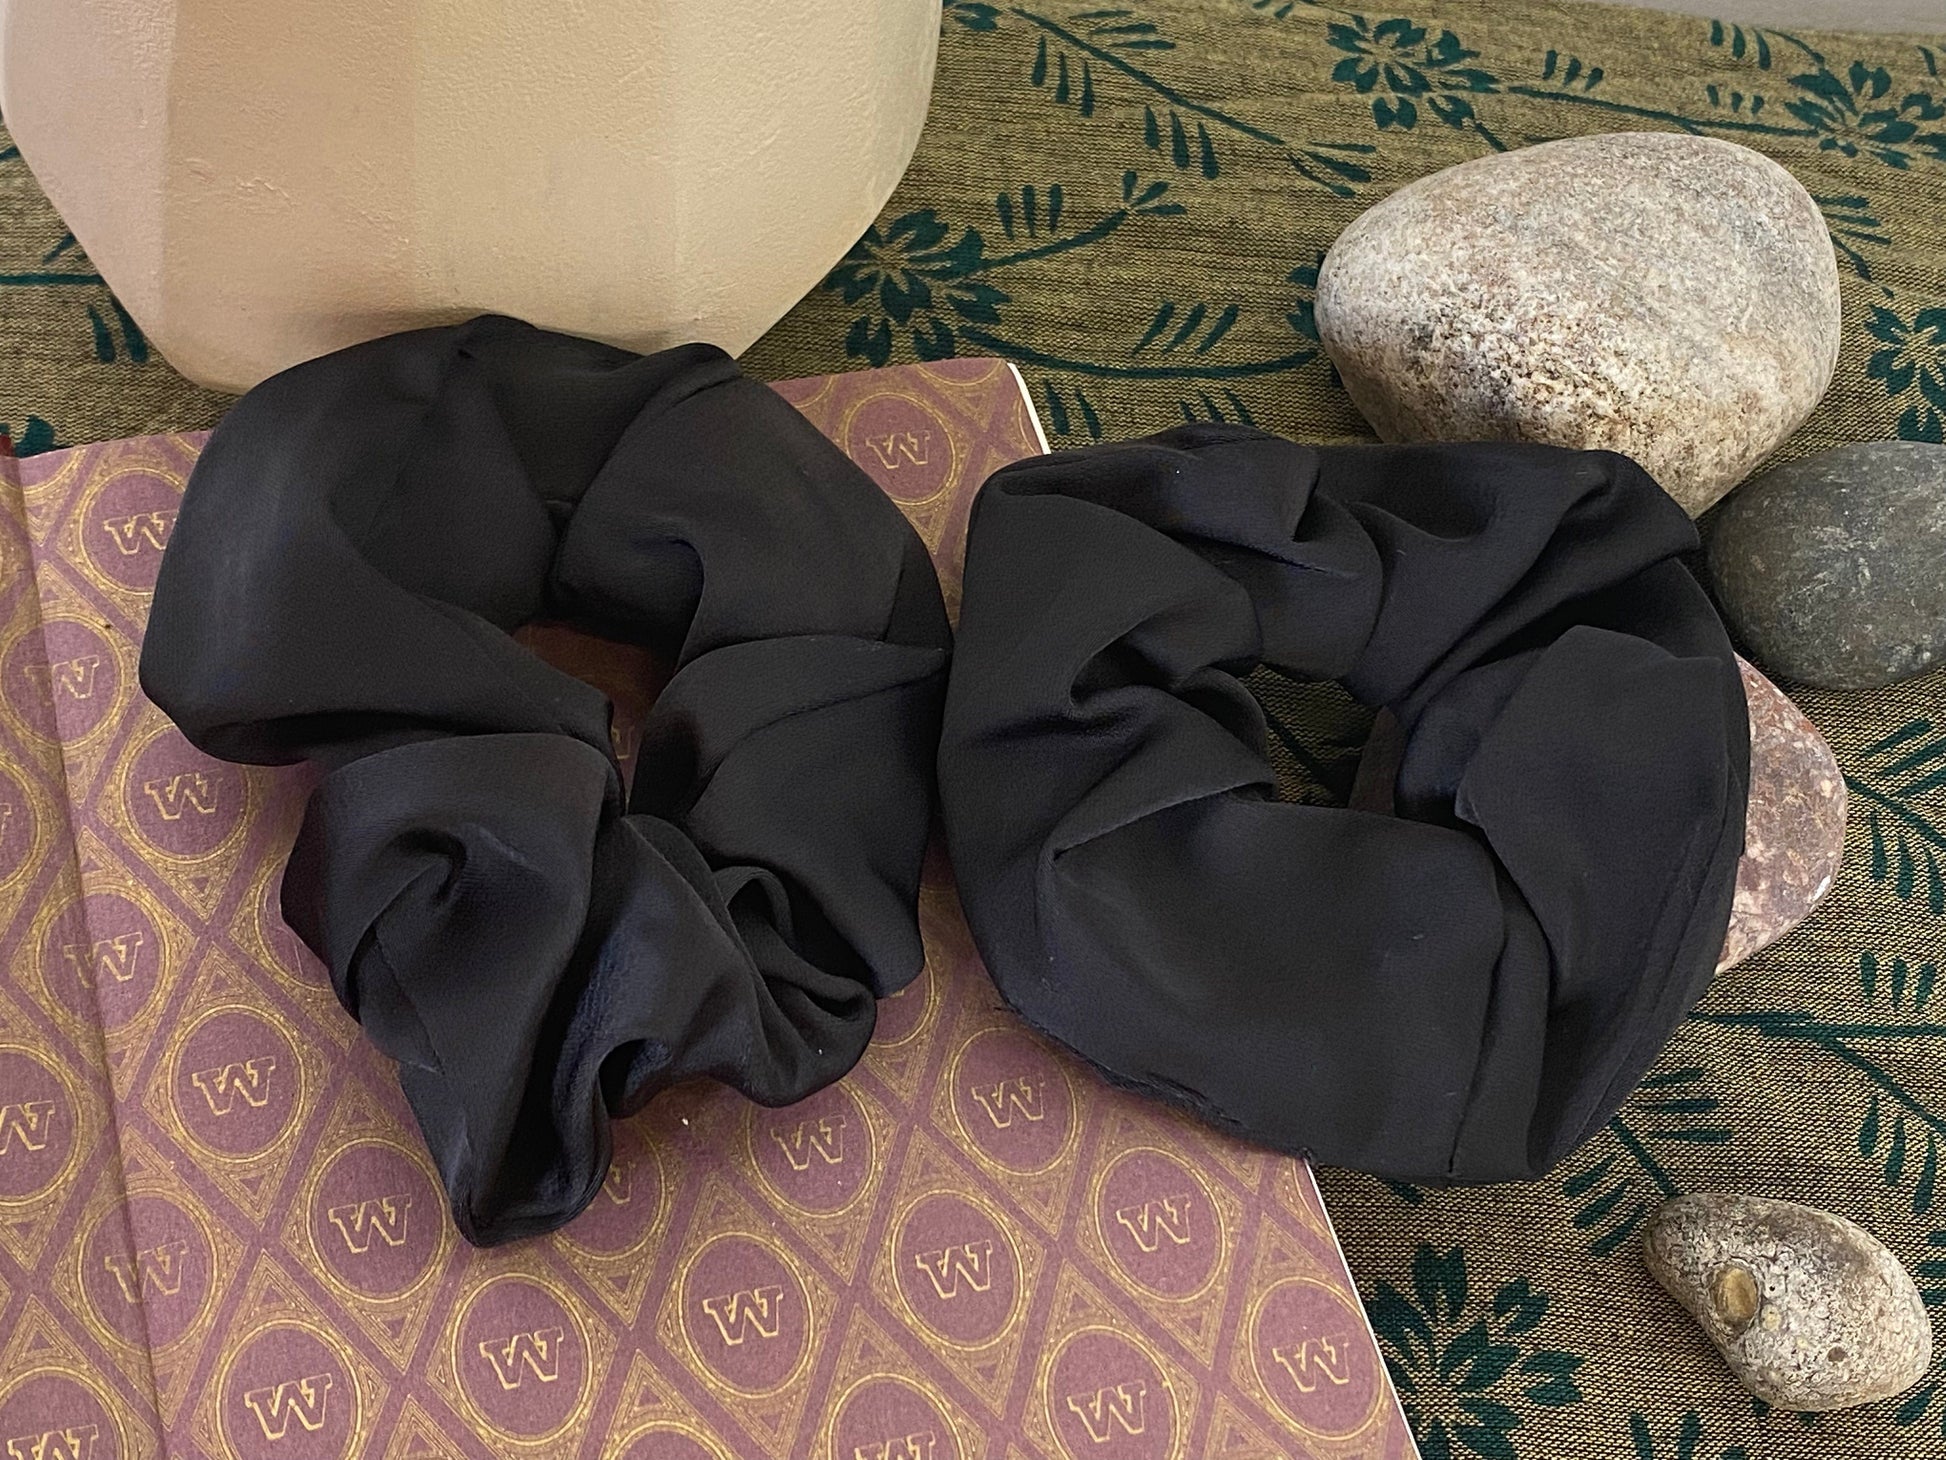 Ted & Bubs Ponytail Holders Softie Scrunchie - Black